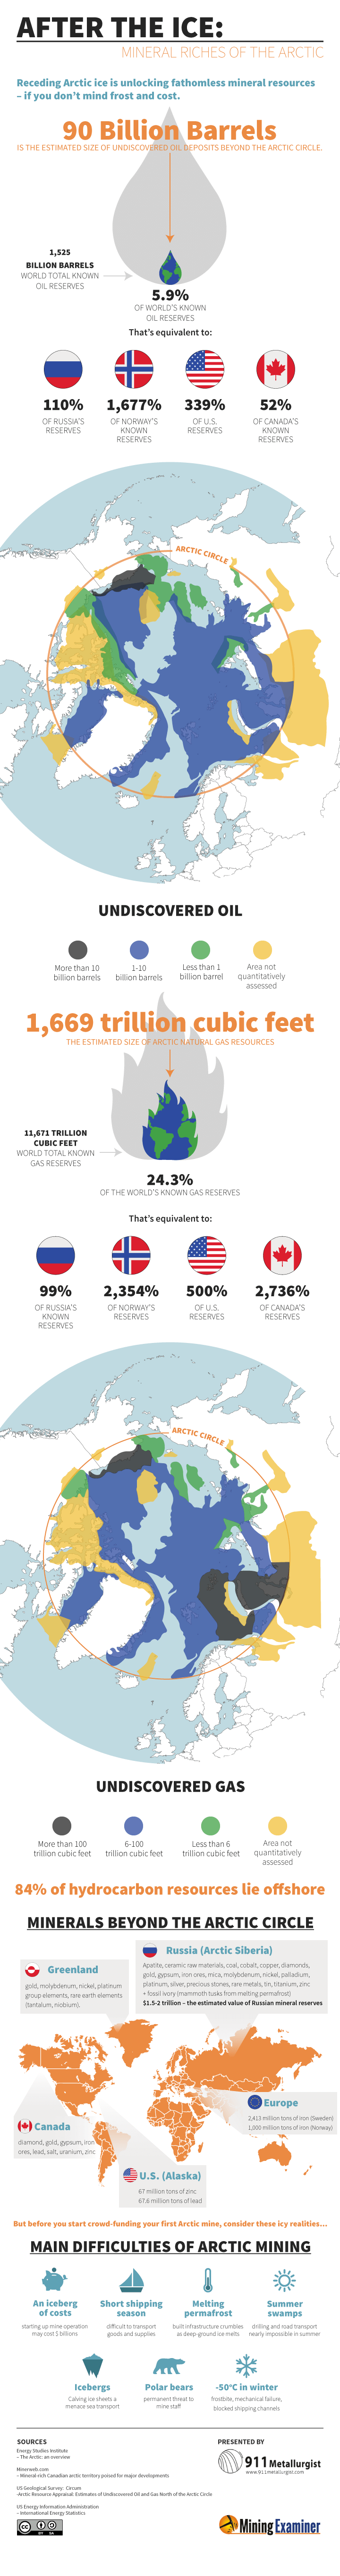 Infographic: The Energy and Mineral Riches of the Arctic